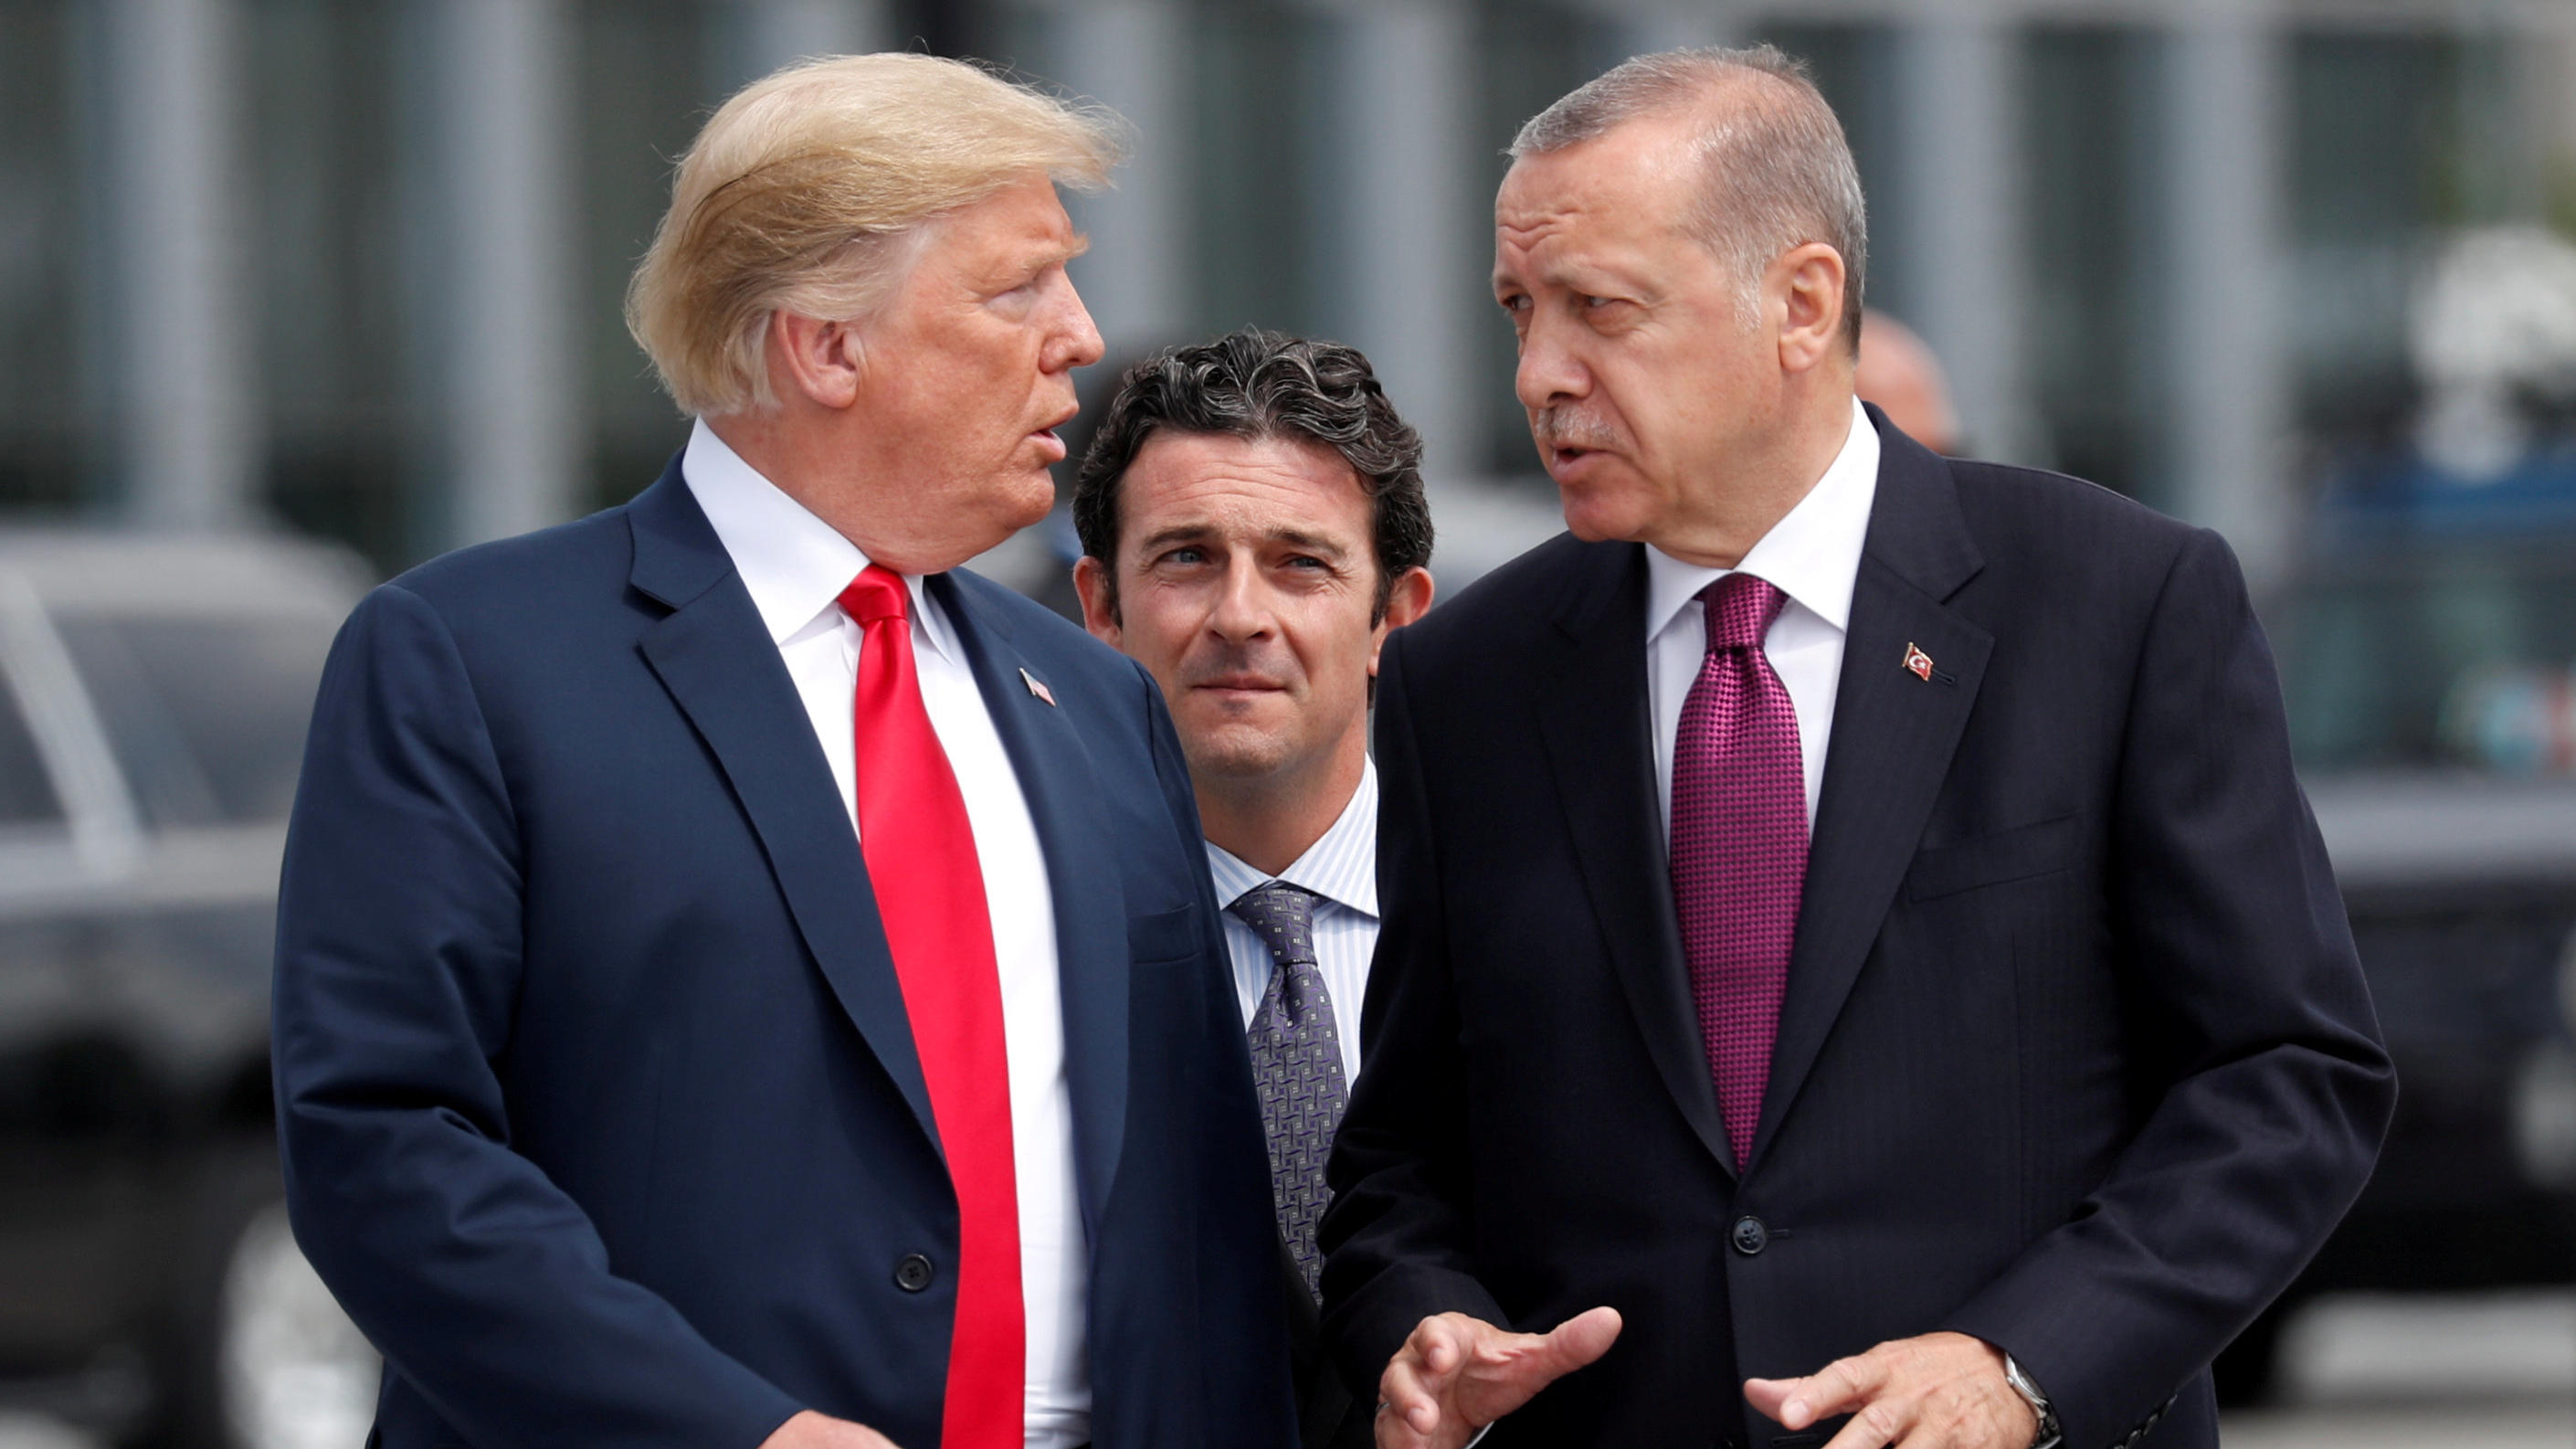 FILE PHOTO: U.S. President Donald Trump and Turkish President Tayyip Erdogan gesture as they talk at the start of the NATO summit in Brussels, Belgium July 11, 2018.  REUTERS/Kevin Lamarque/File Photo